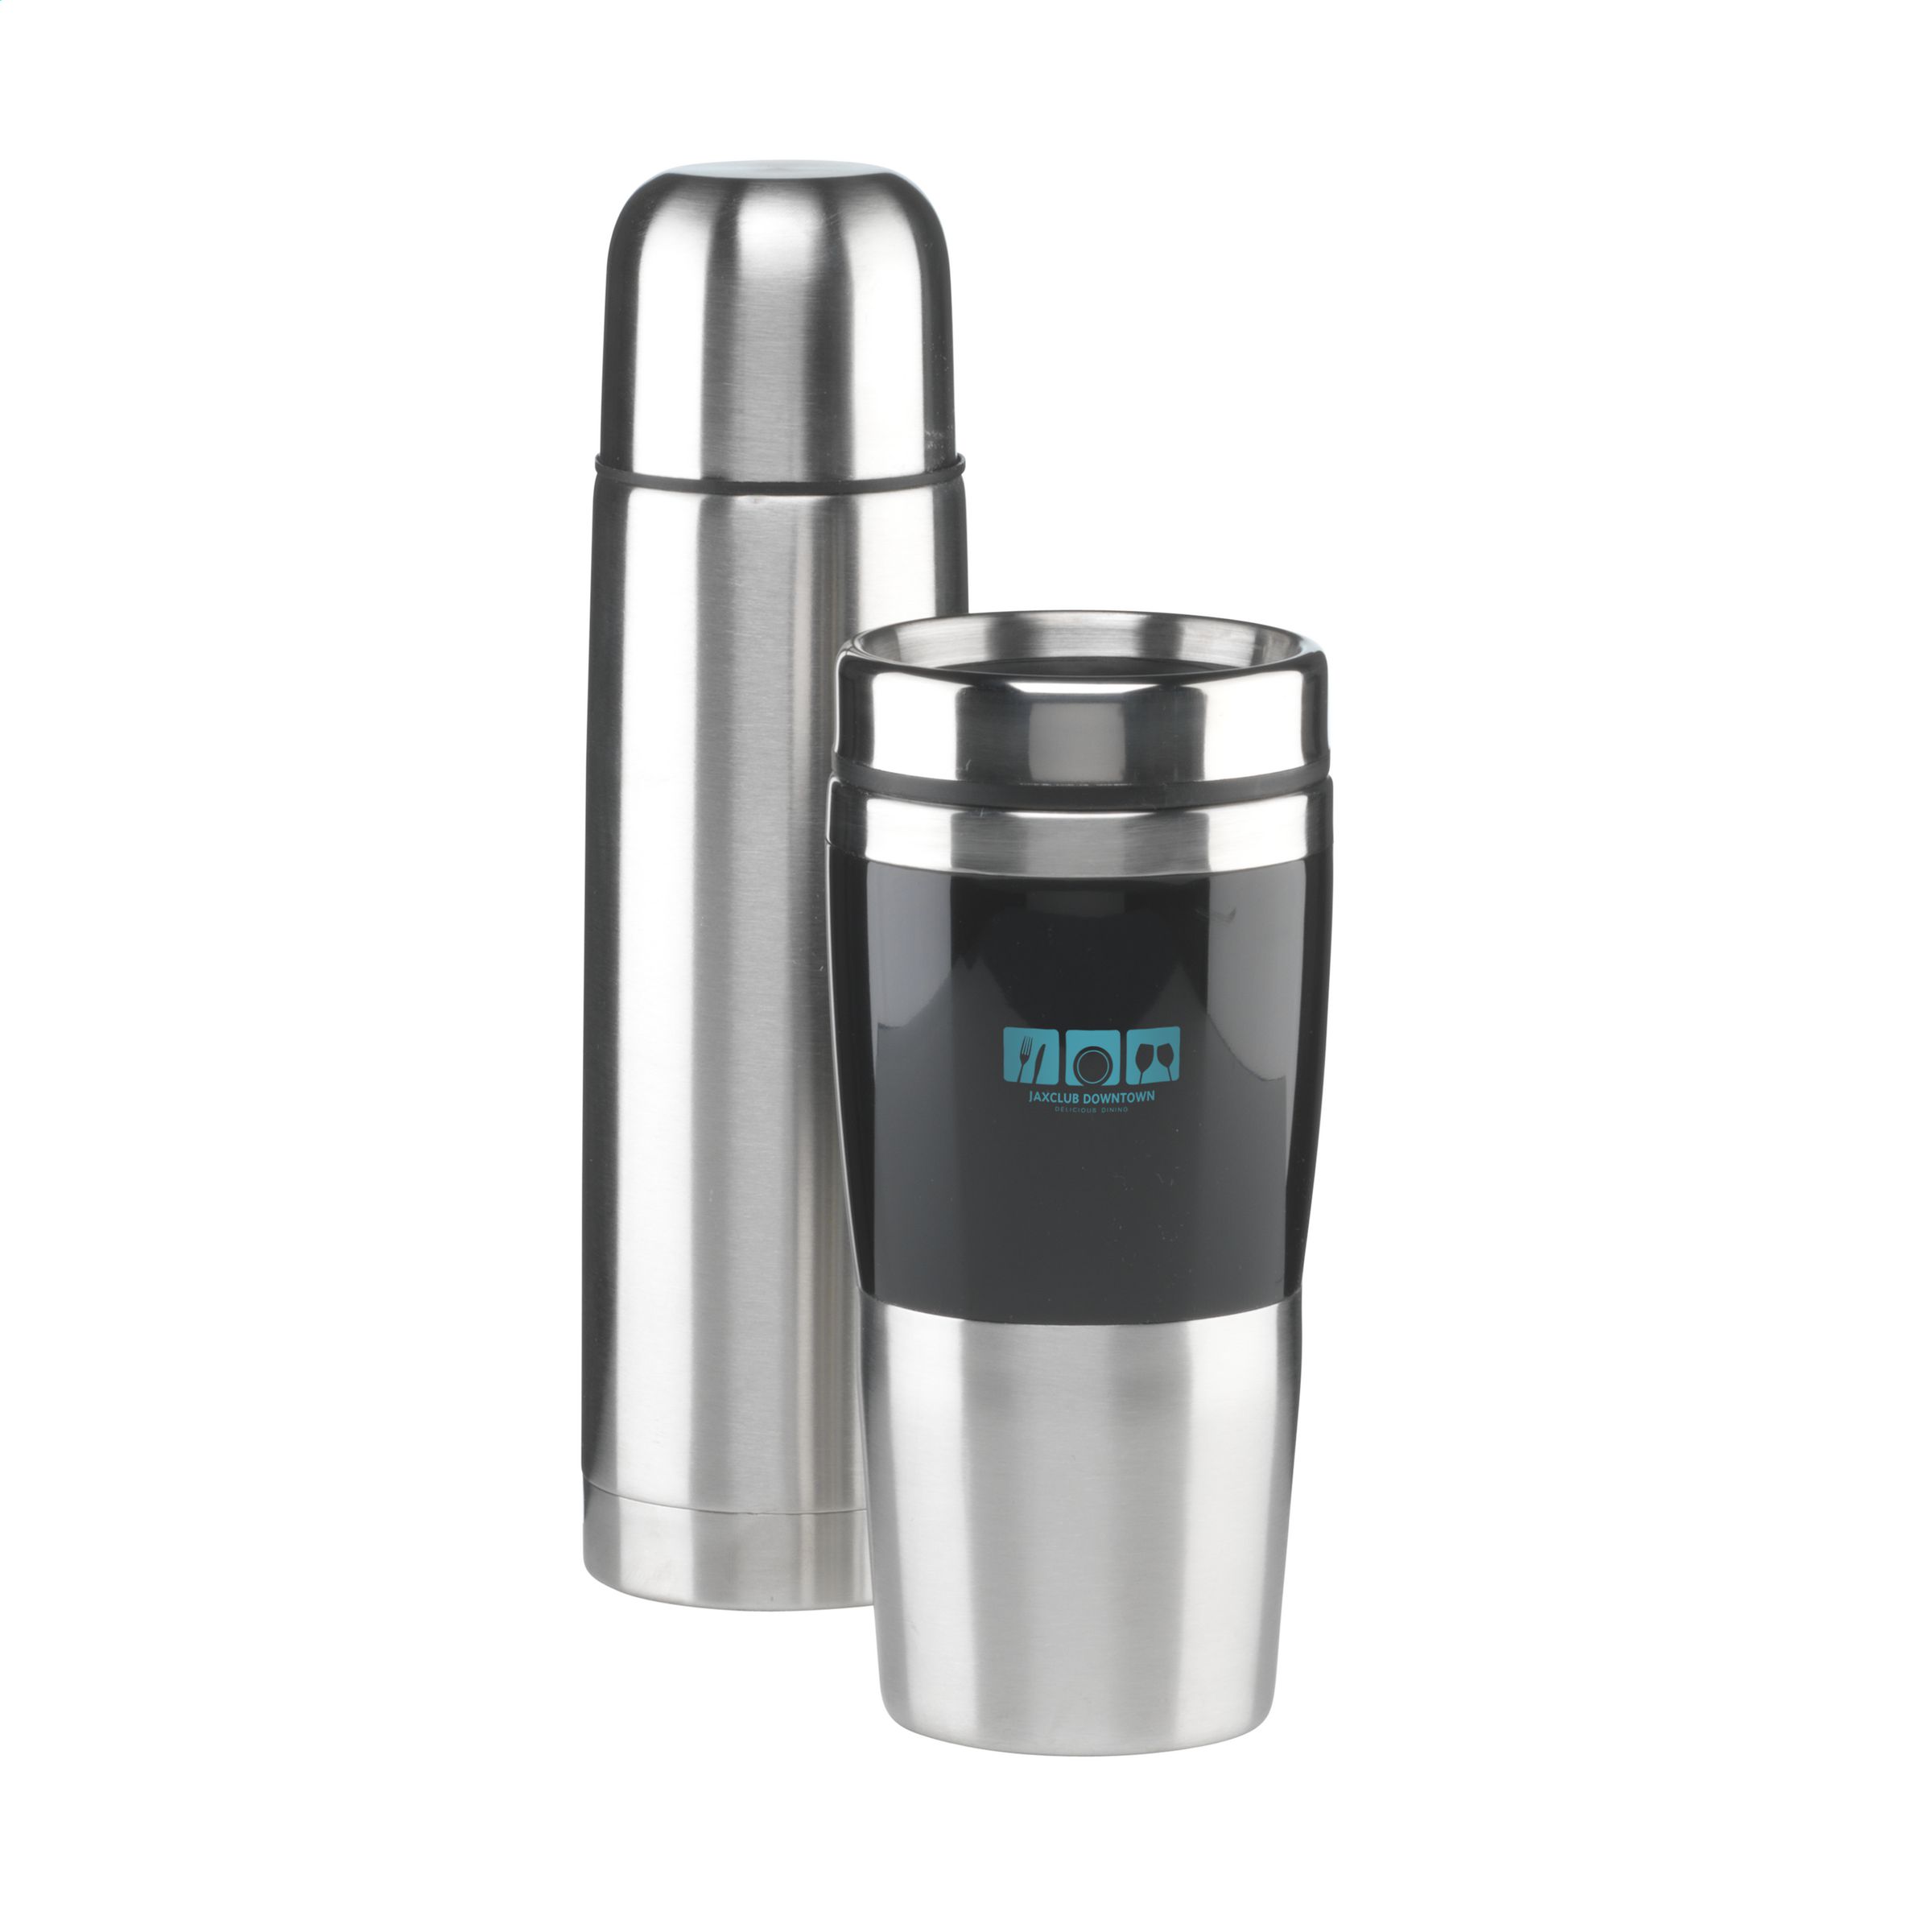 Double-Walled Stainless Steel Thermo Flask and Thermo Mug Gift Set - Aylesbury - Hatton